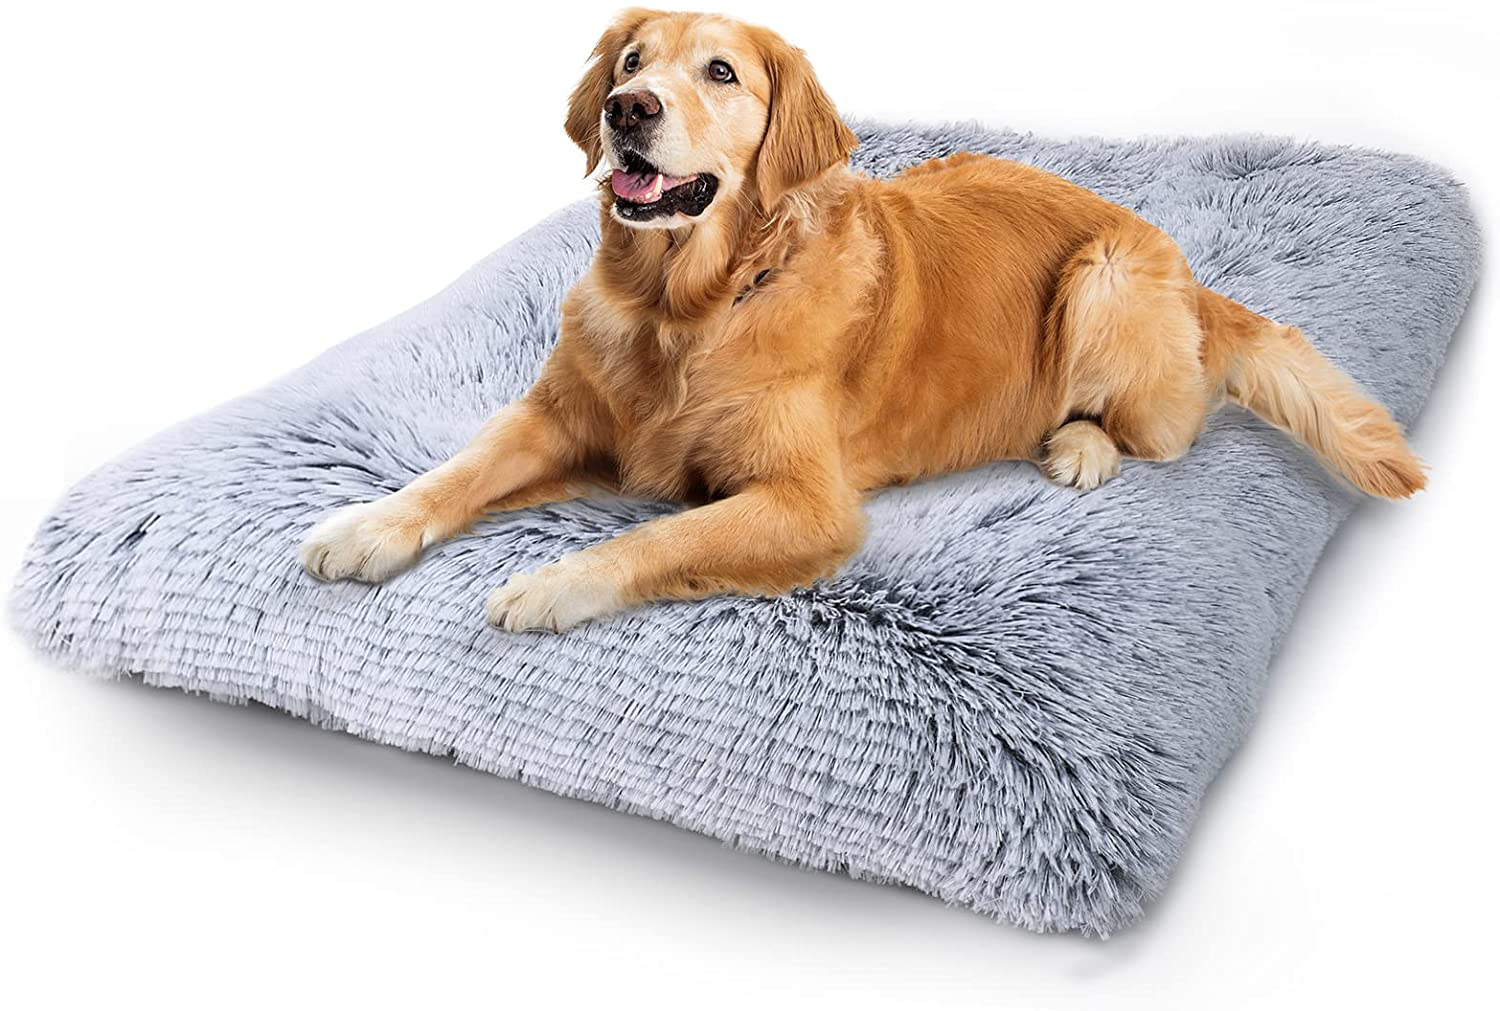 Vonabem Dog Bed Crate Pad, Deluxe Plush Soft Pet Beds, Washable